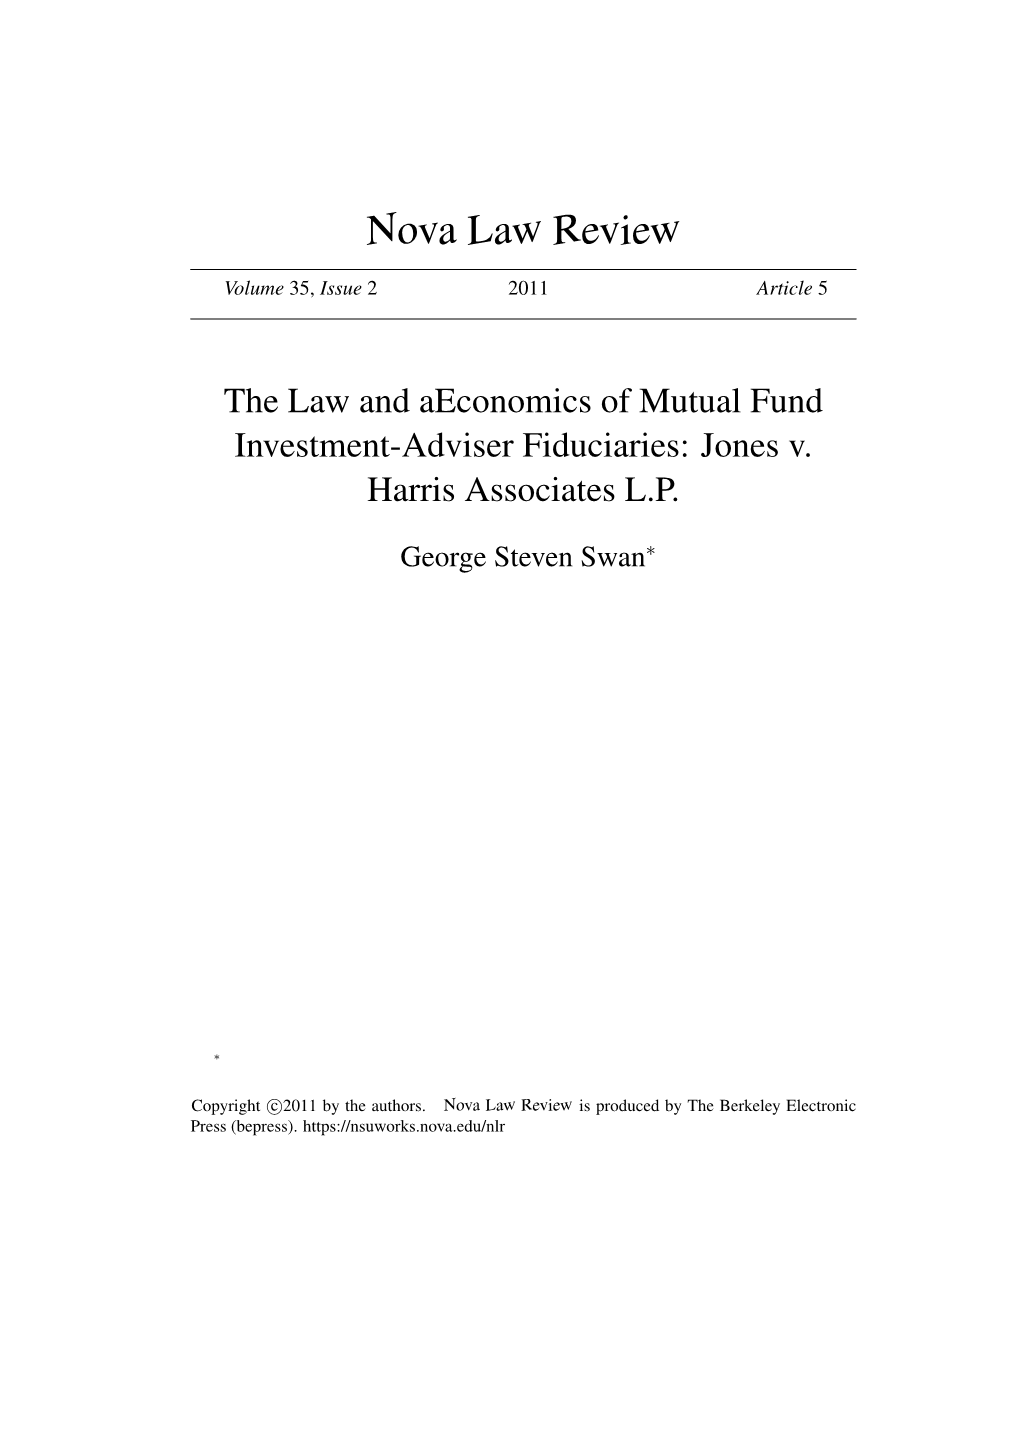 The Law and Aeconomics of Mutual Fund Investment-Adviser Fiduciaries: Jones V